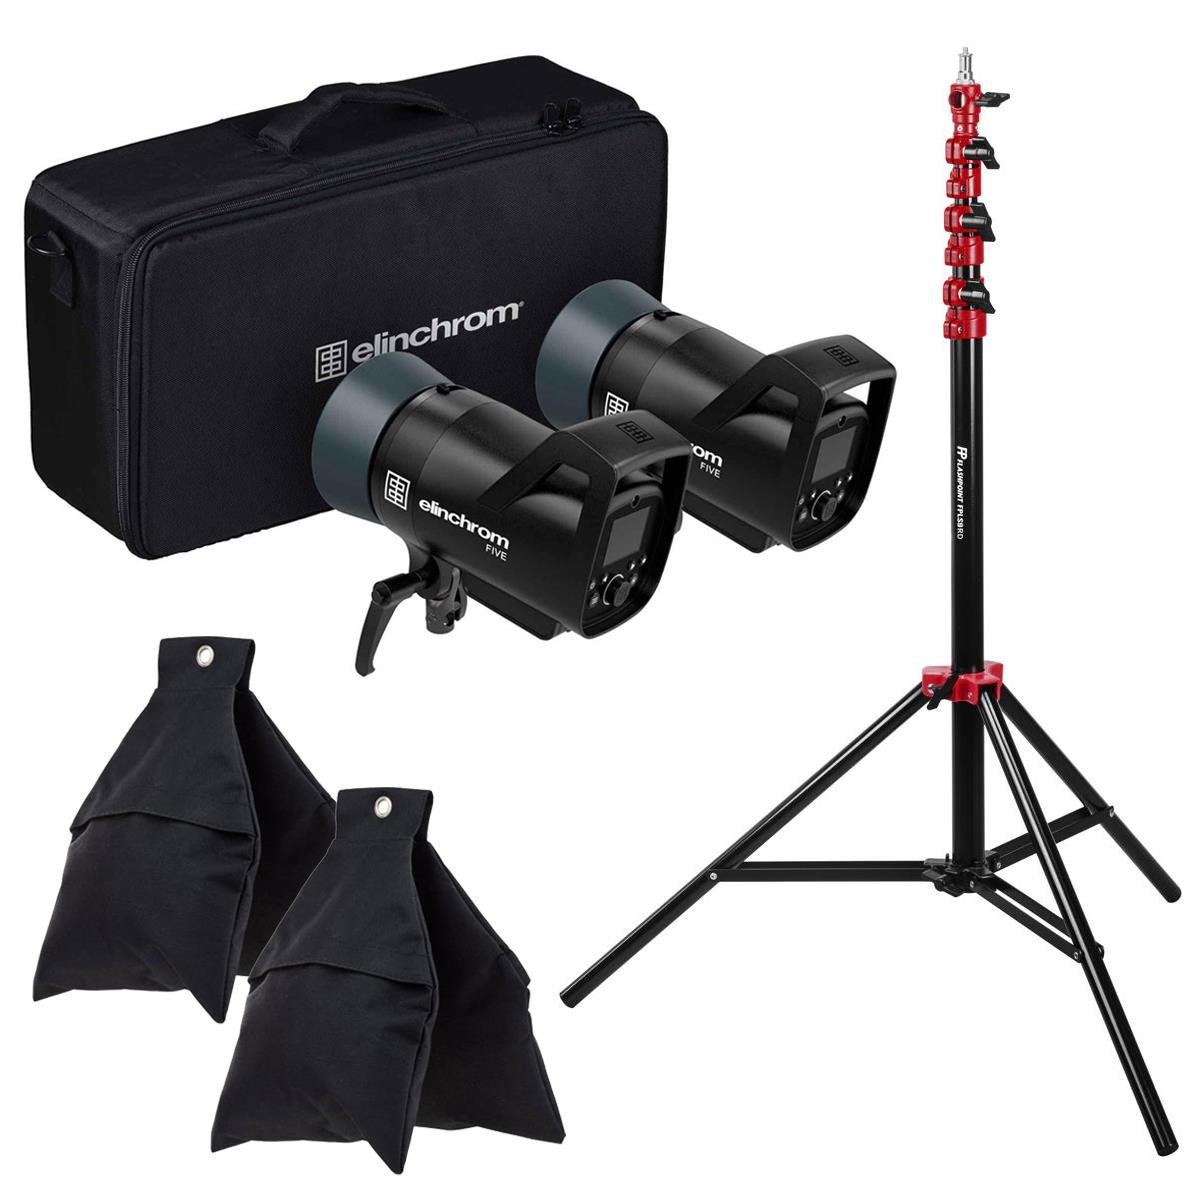 Image of Elinchrom FIVE 522Ws Monolight Dual Kit with 9.5' Stand and 2x Weight Sand Bag